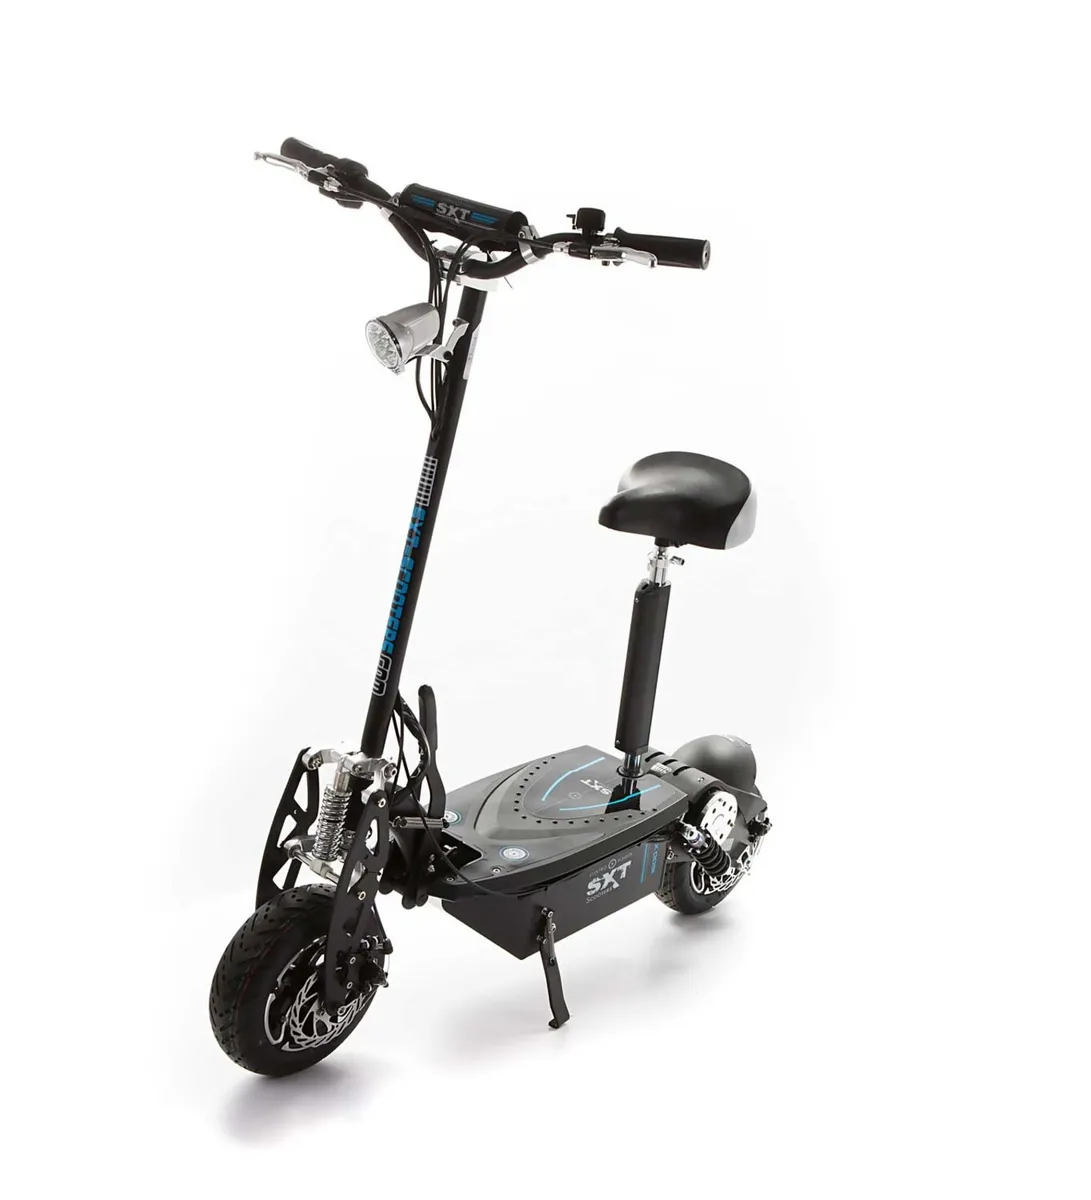 SXT 1600 WATT 55 kph E Scooter (DELIVERY-PACKAGE) - Image 1